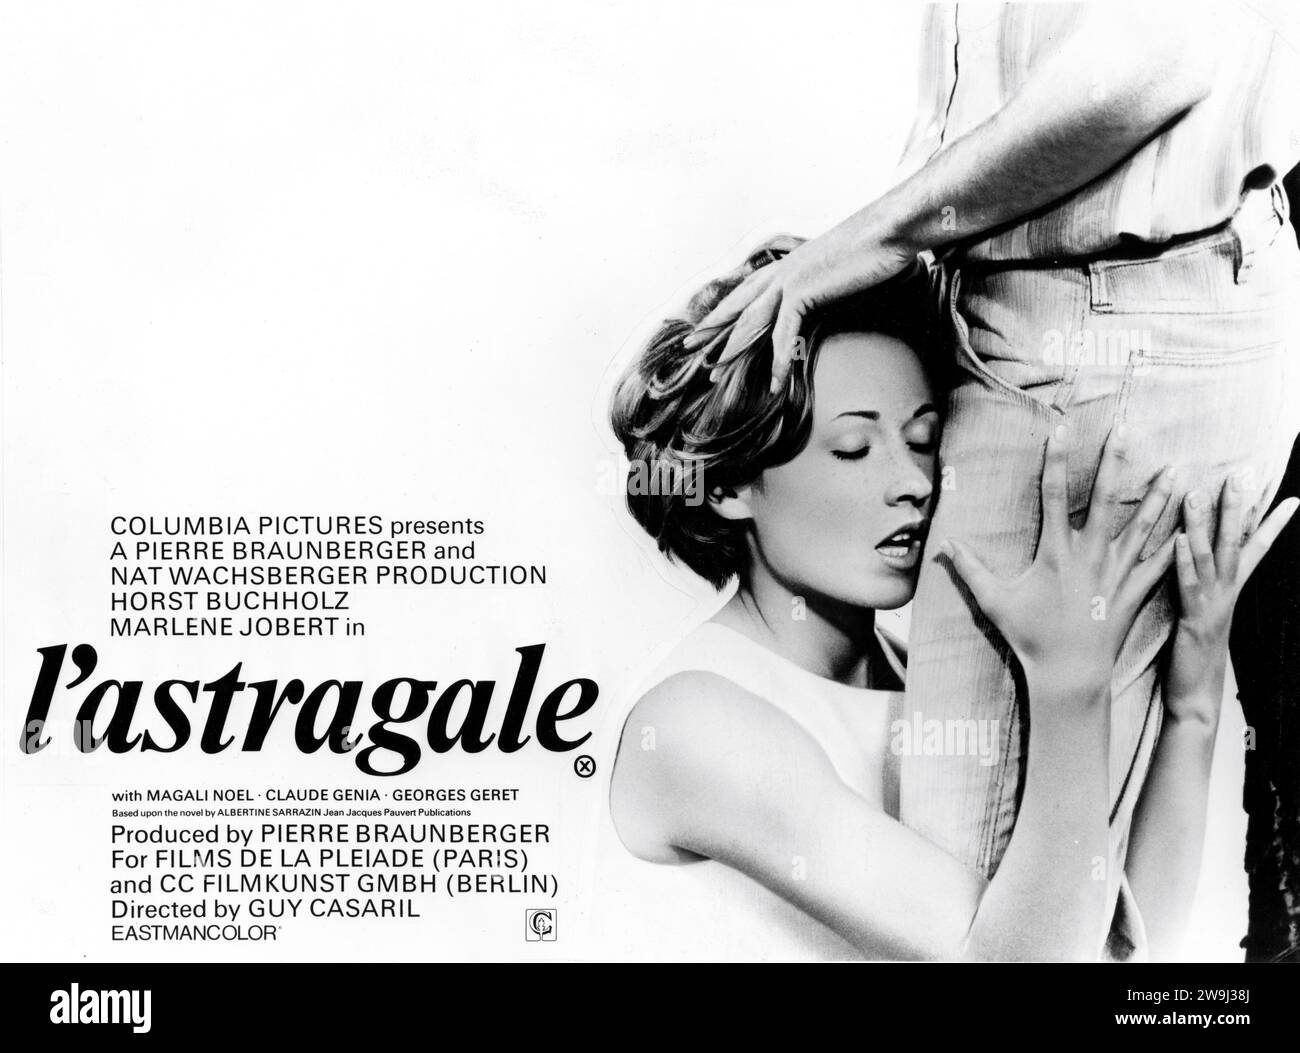 HORST BUCHHOLZ and MARLENE JOBERT in L'ASTRAGALE 1968 director / screenplay GUY CASARIL novel Albertine Sarrazin France - West Germany co-production Films de la Pleiade / CC Filmkunst GmbH / Columbia Pictures Stock Photo